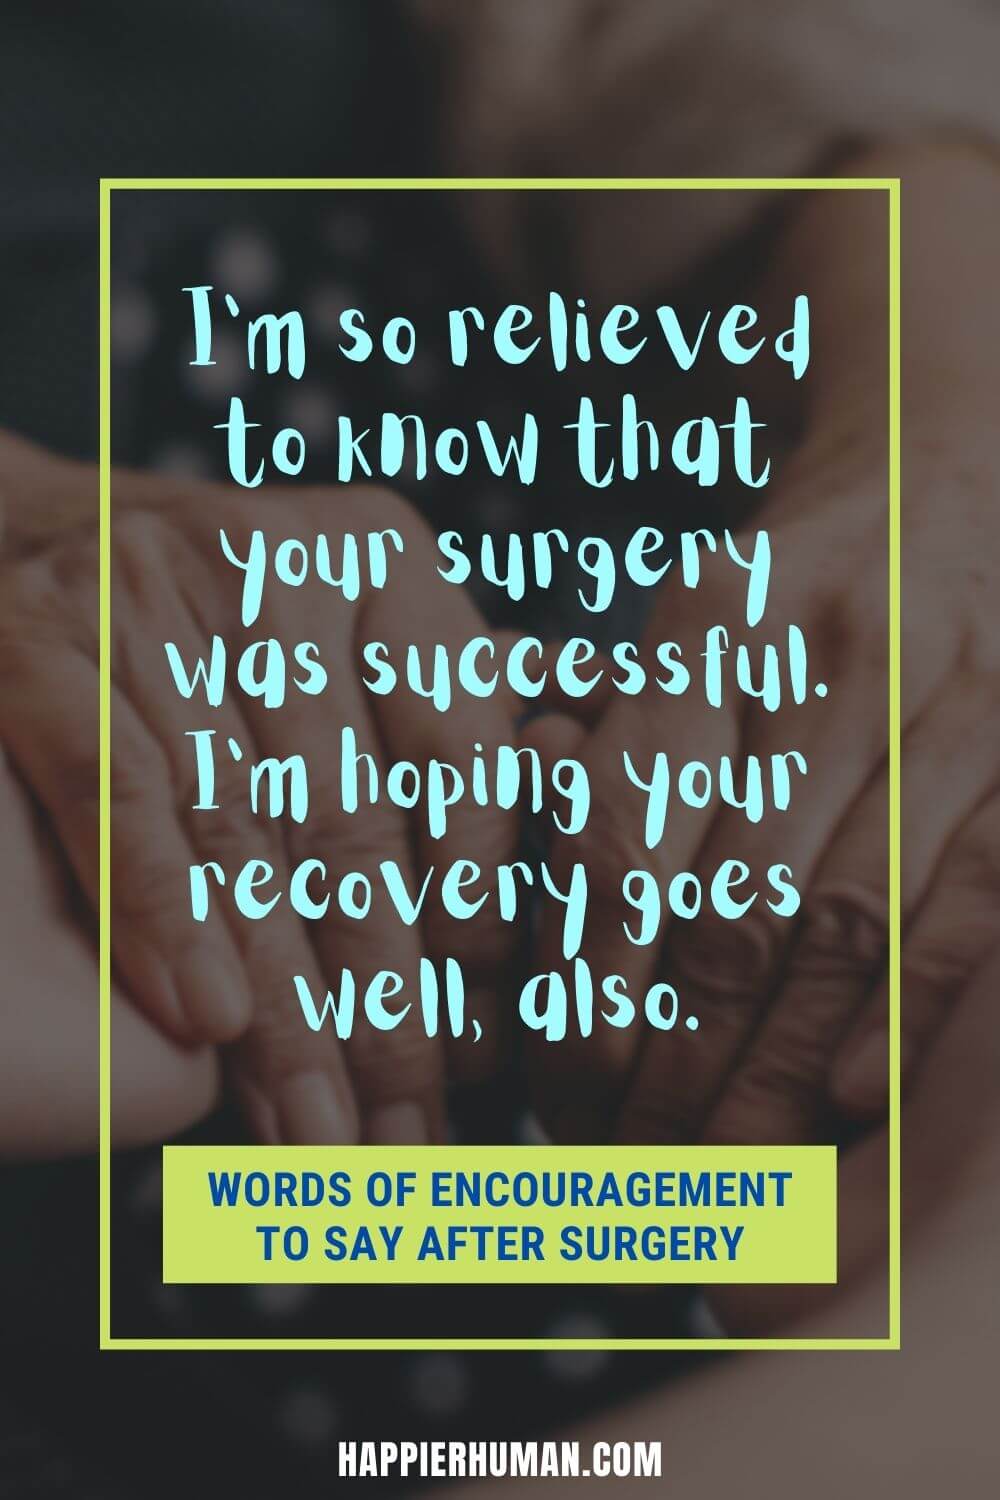 words of encouragement after knee surgery | words of encouragement after major surgery | words of encouragement after breast cancer surgery